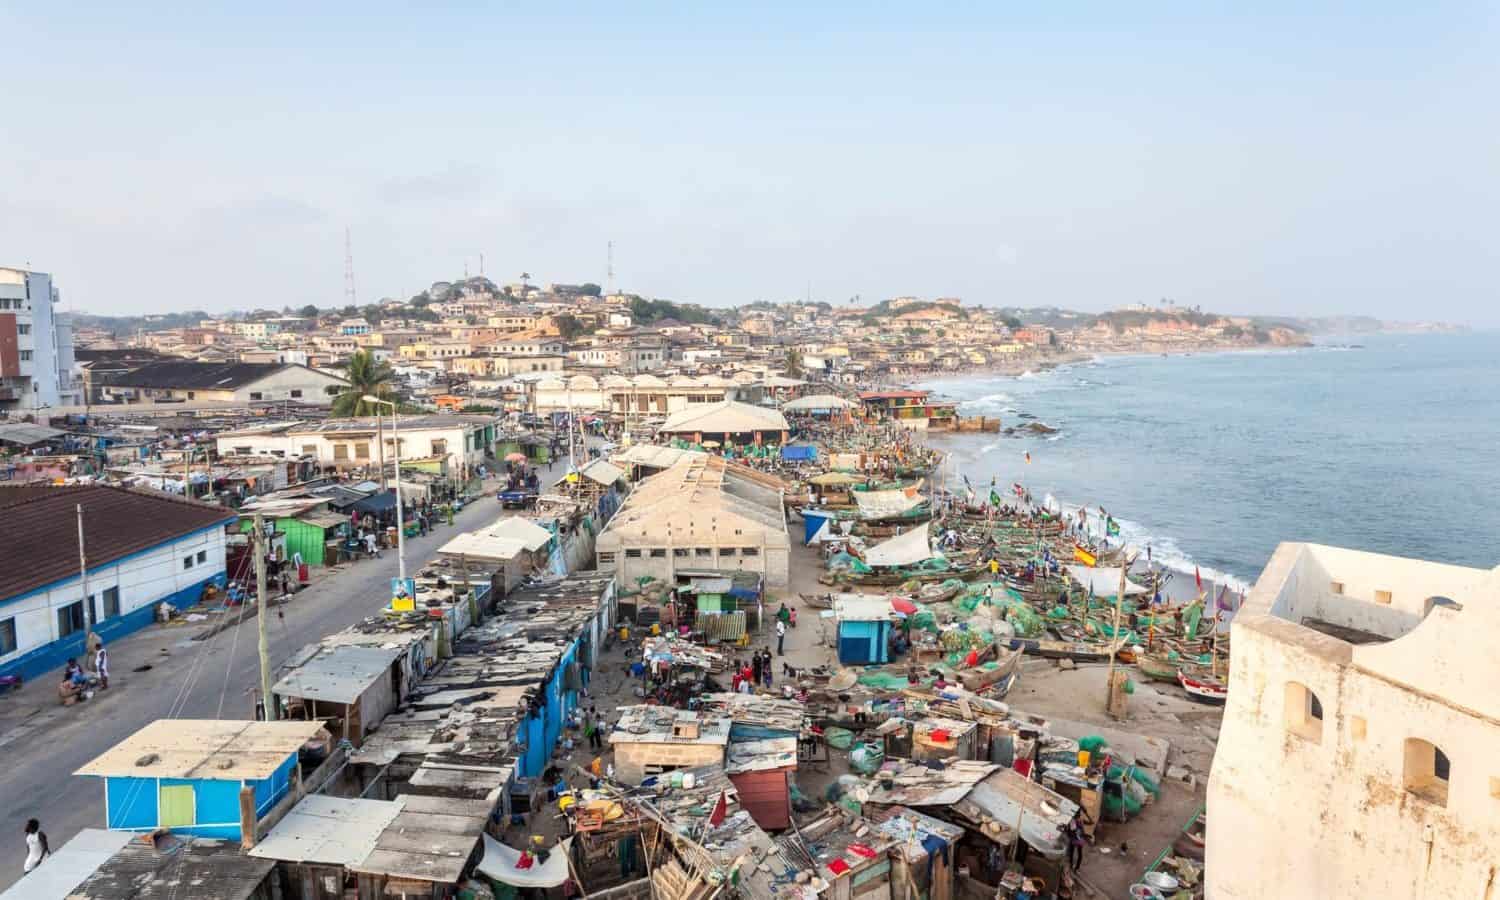 Sustainable living shouldn’t just be for the middle class—environmentalists in Ghana’s capital Accra are pushing for a greener future for all.